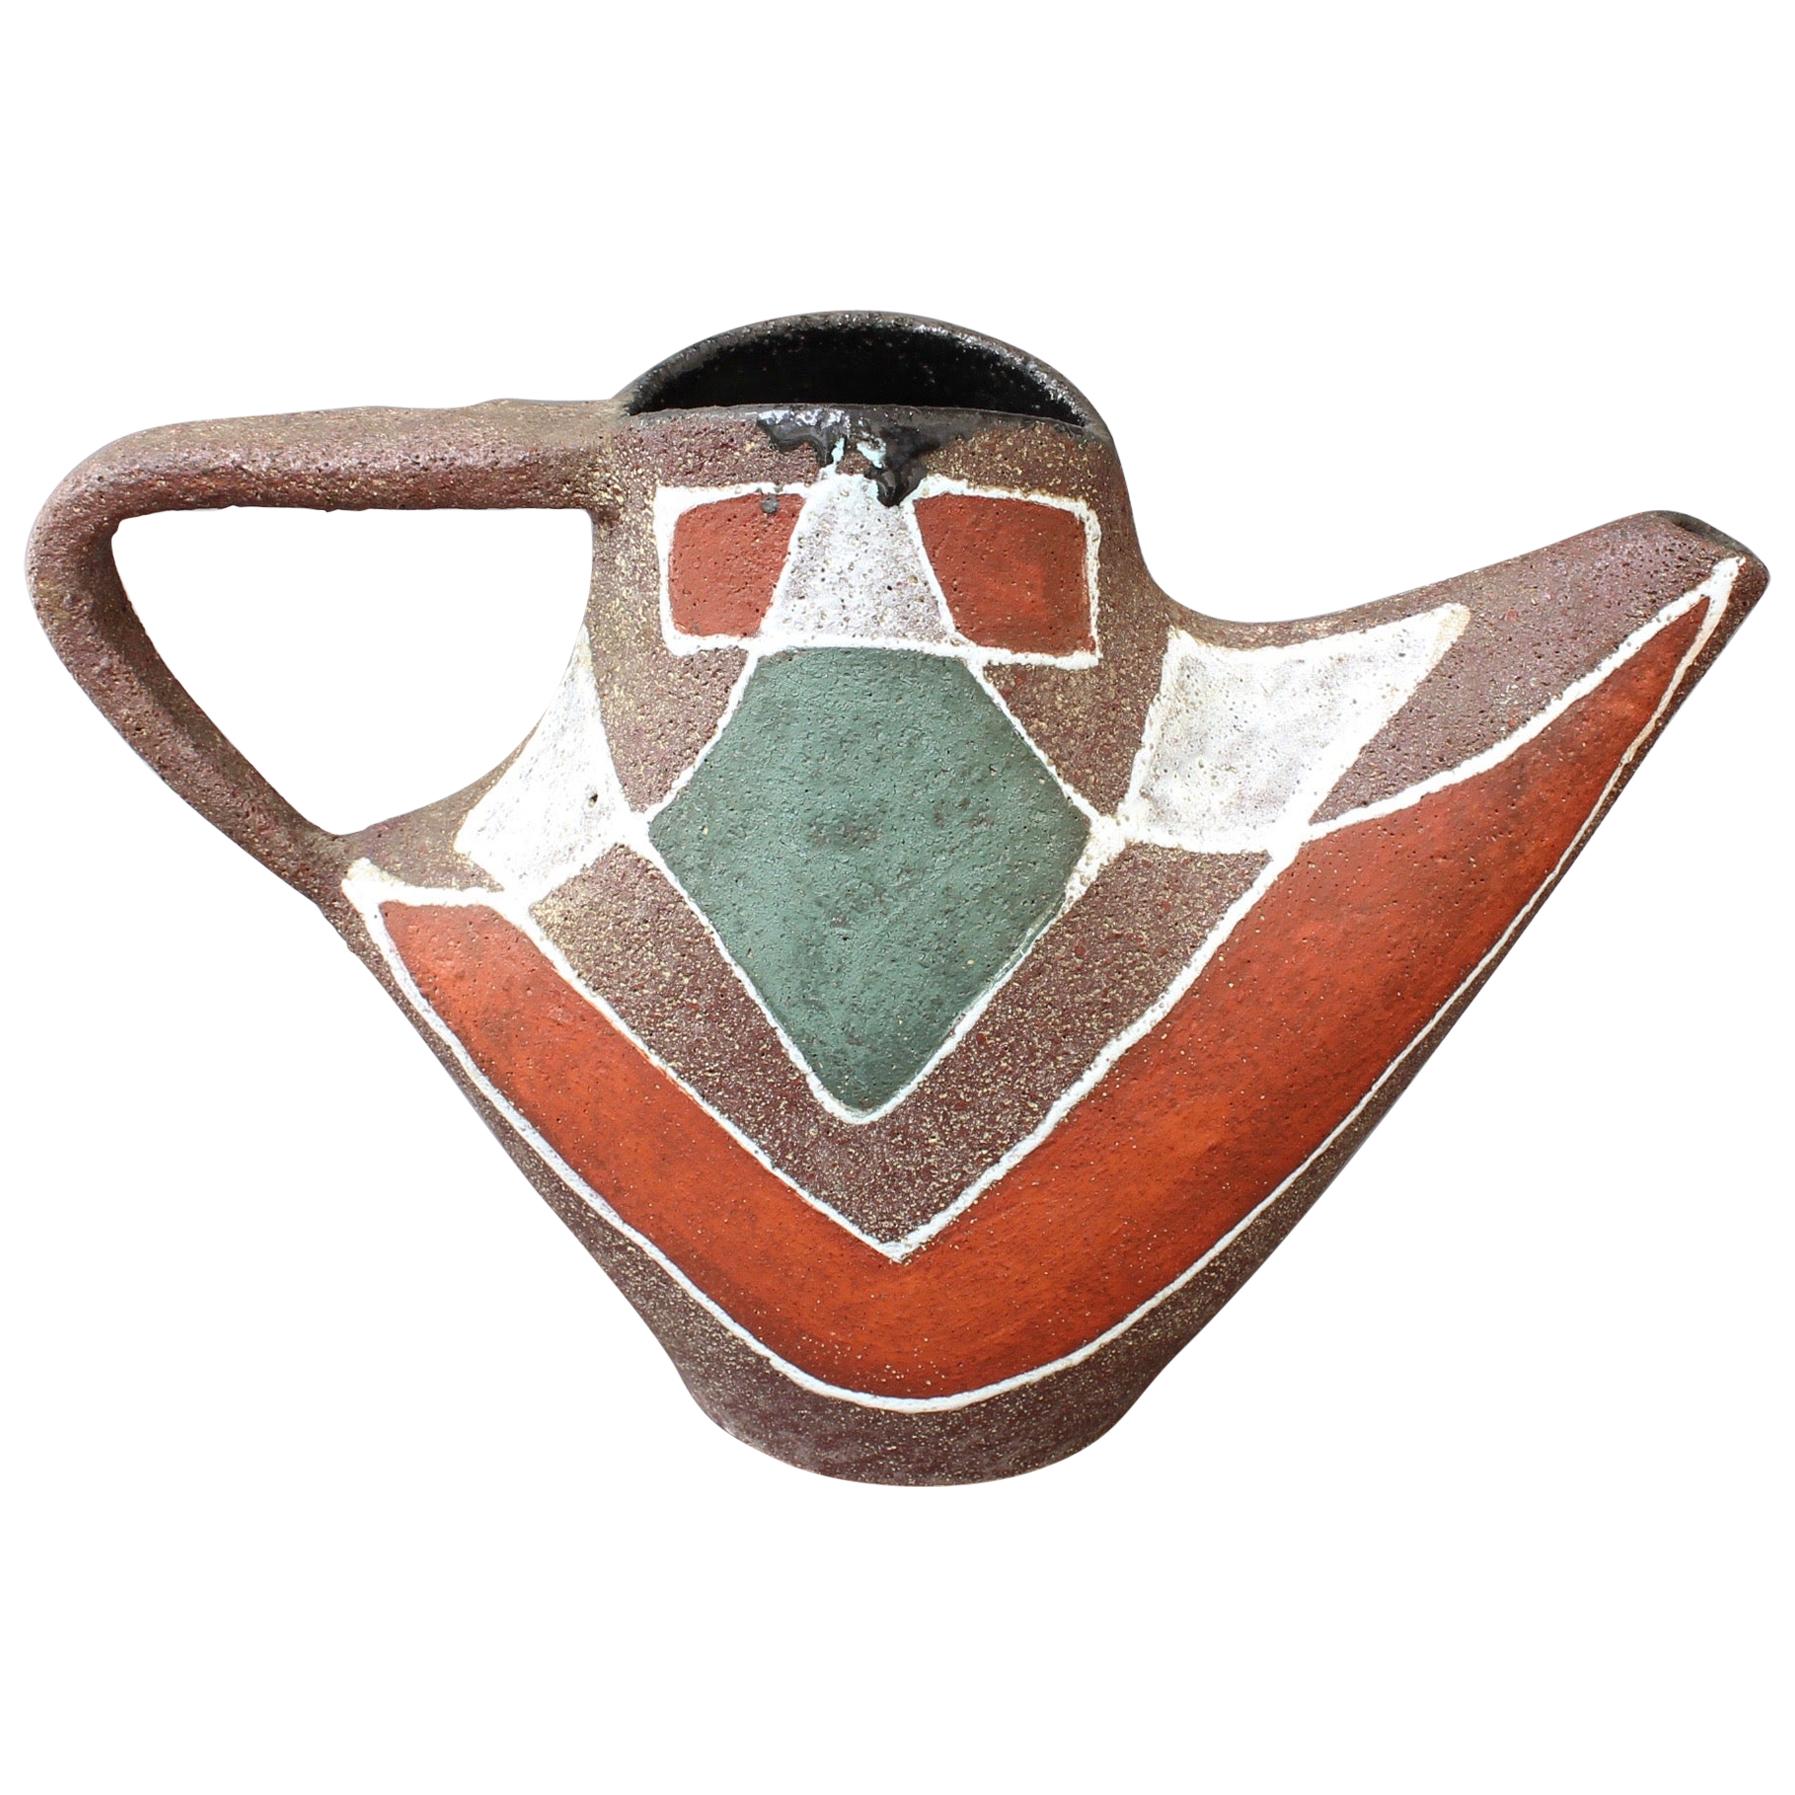 Stylised MidCentury Ceramic Watering Pot / Vase by Accolay, circa 1950s